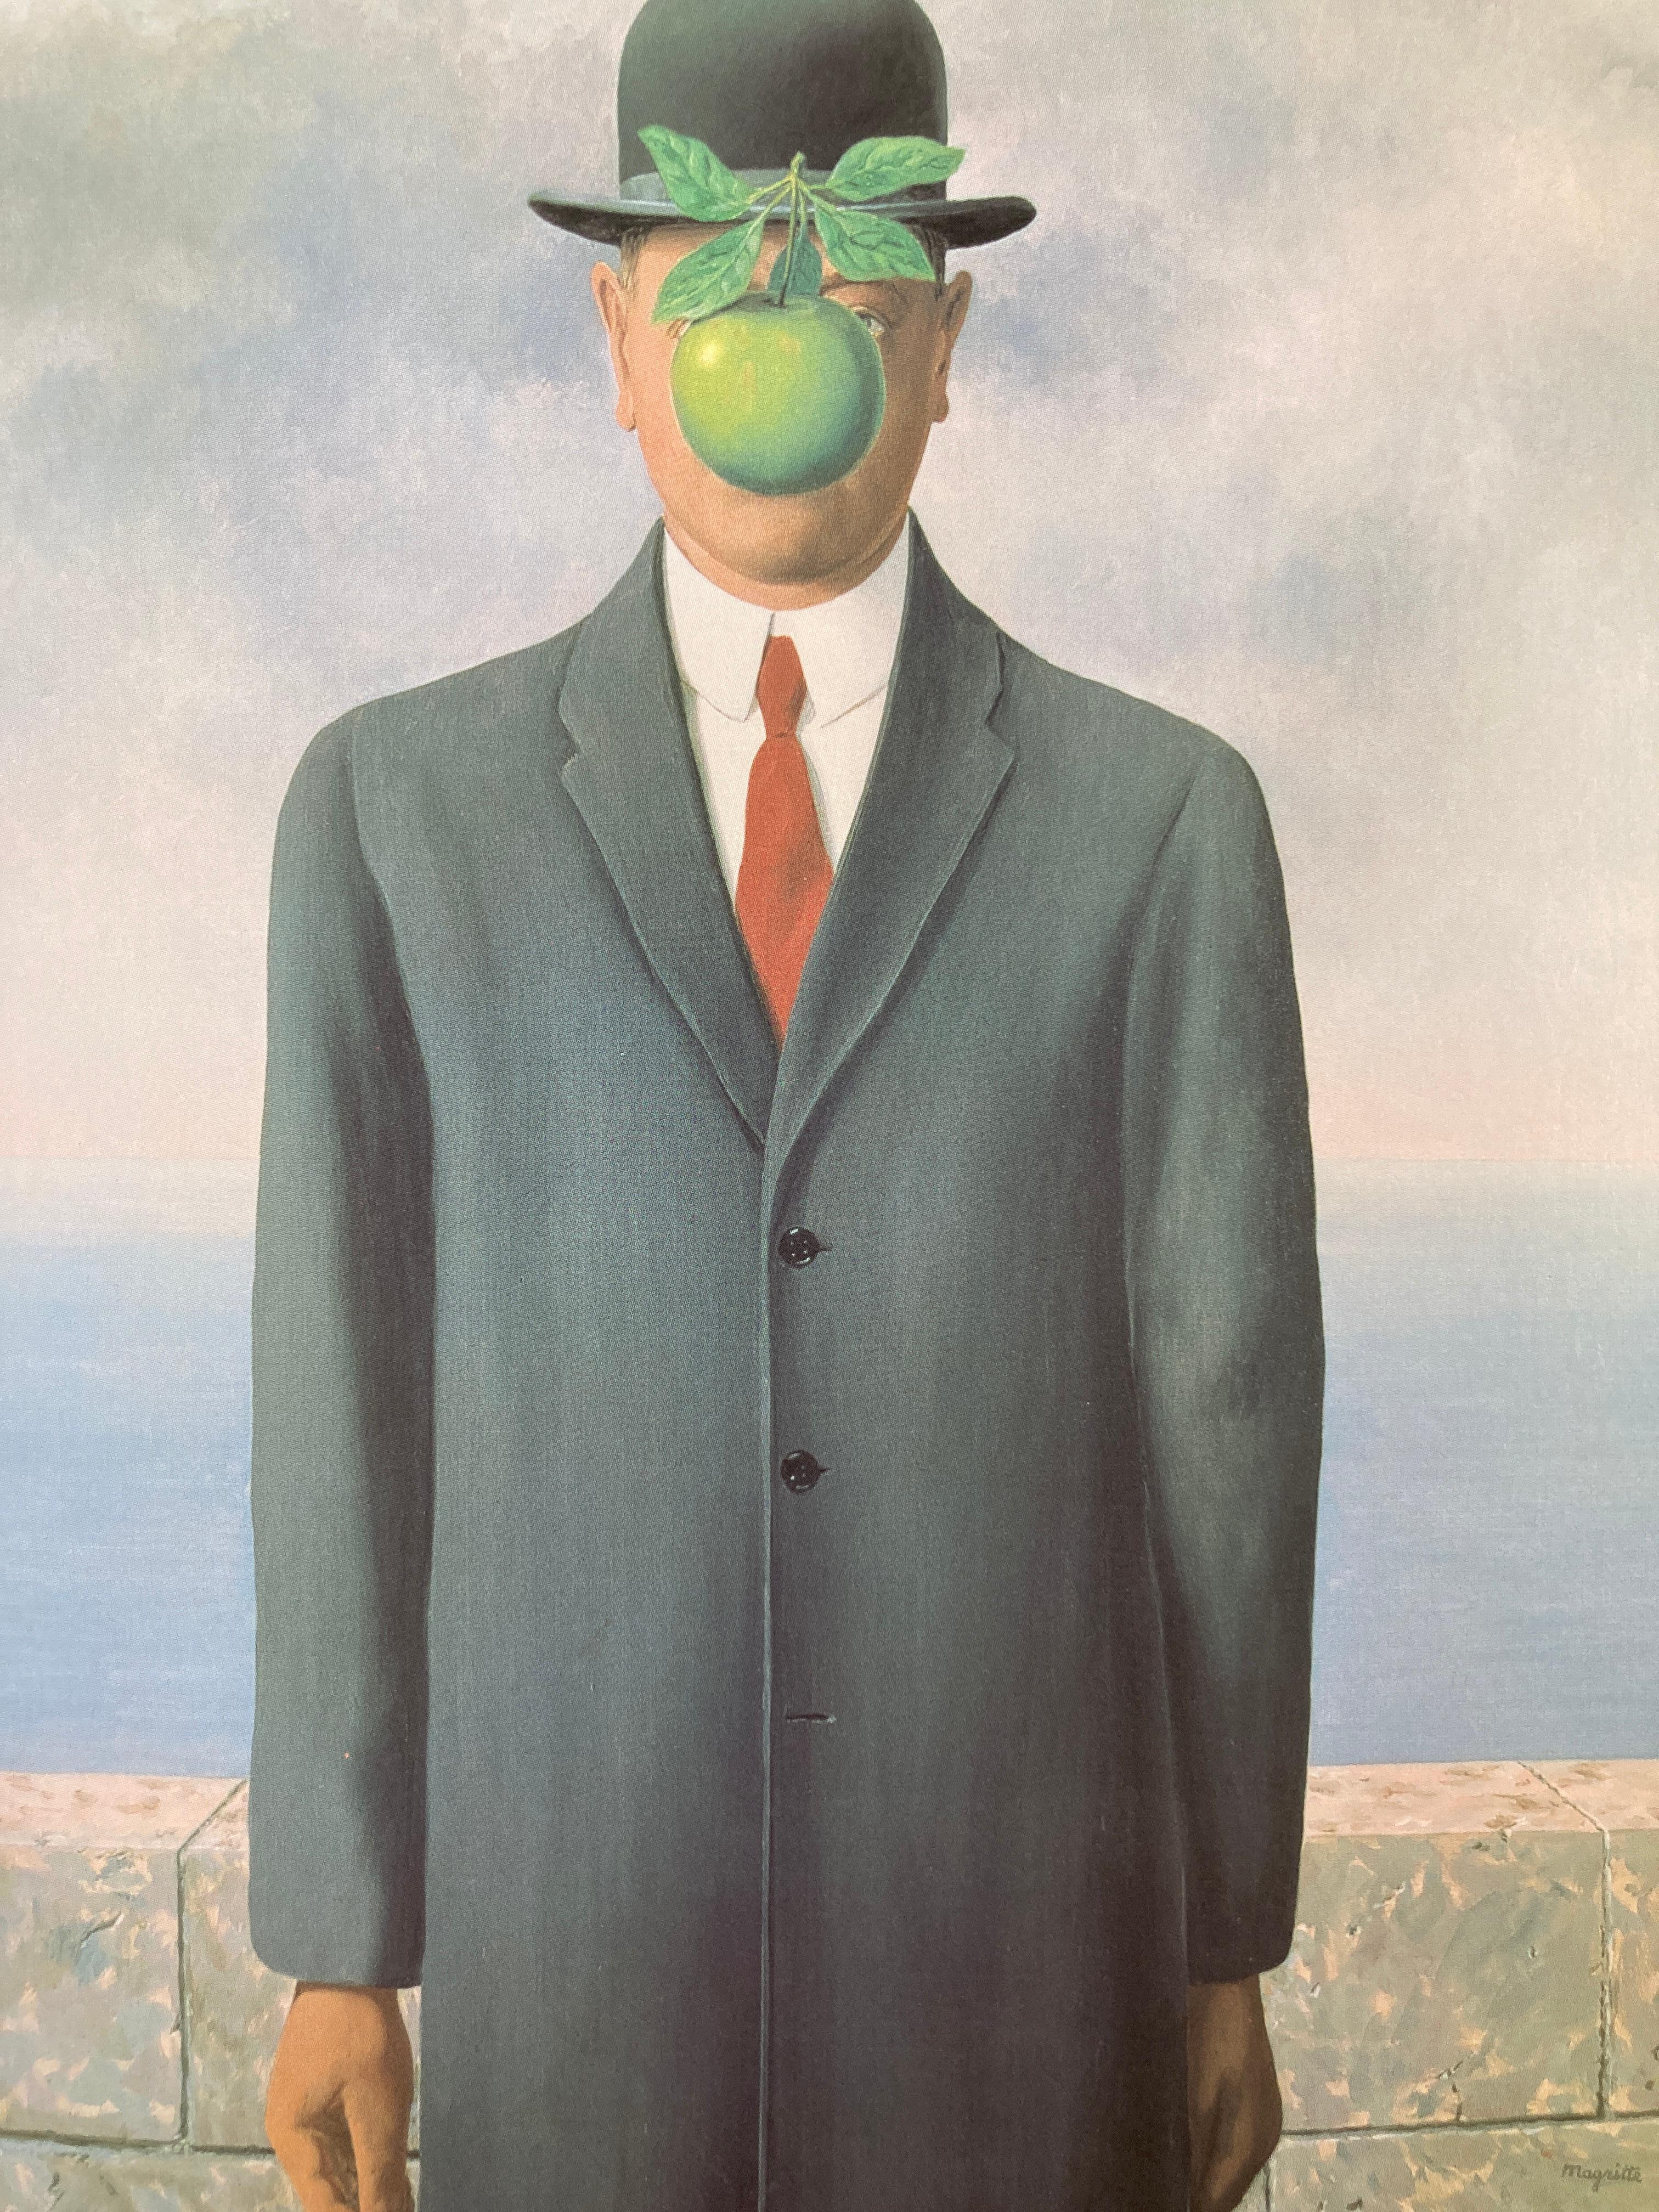 Rene Magritte by Siegfried Gohr Coffee Table Book 5